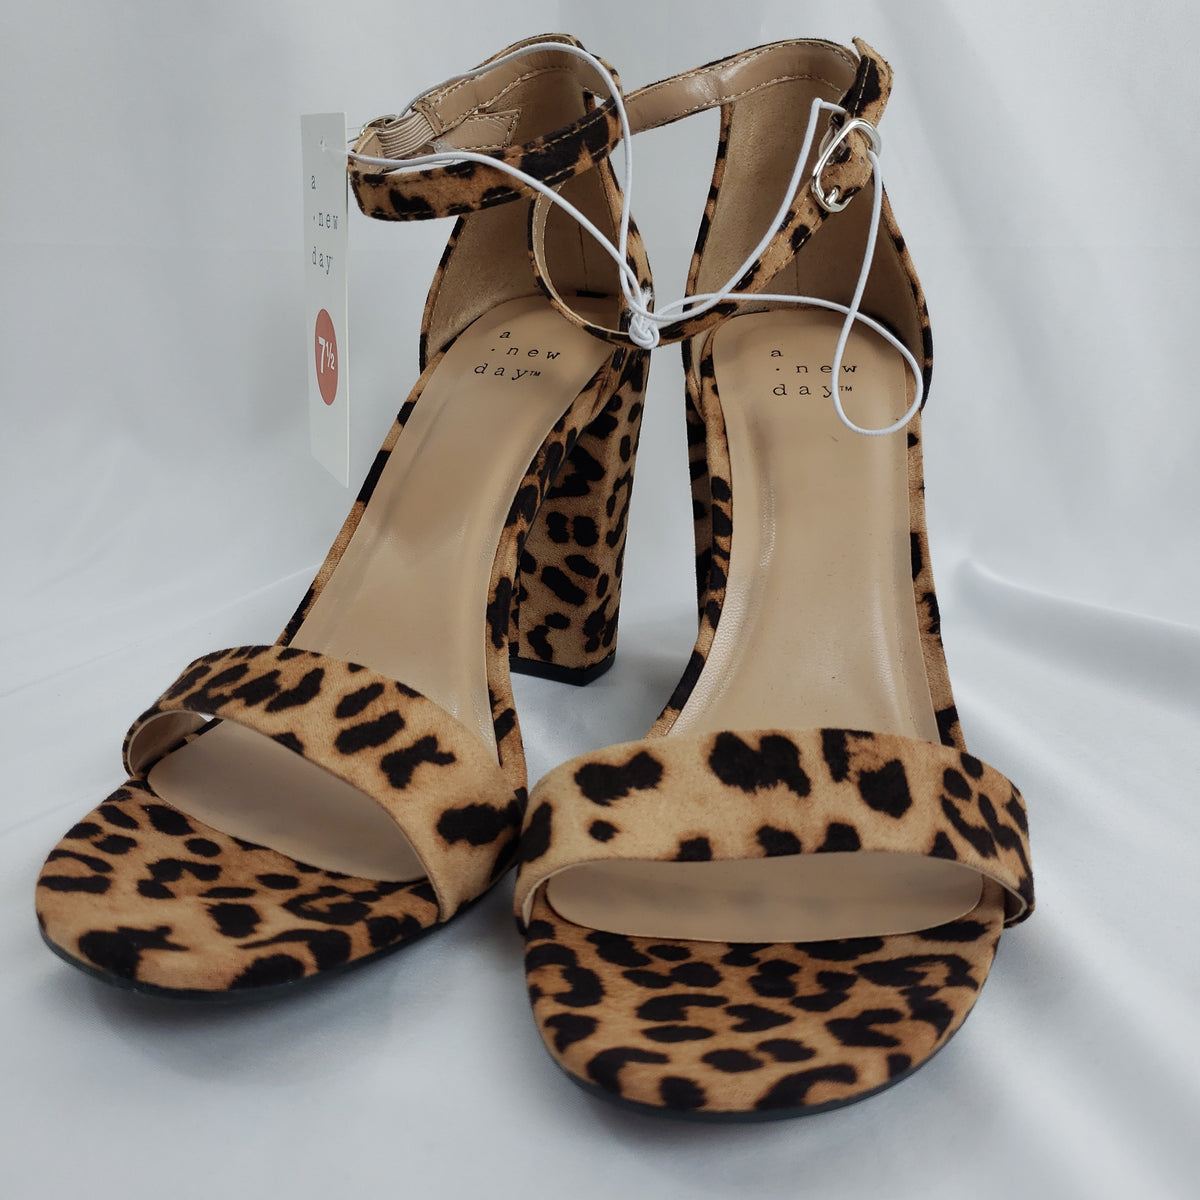 How You Can Rock The Animal Print Trend - Pumps & Push Ups